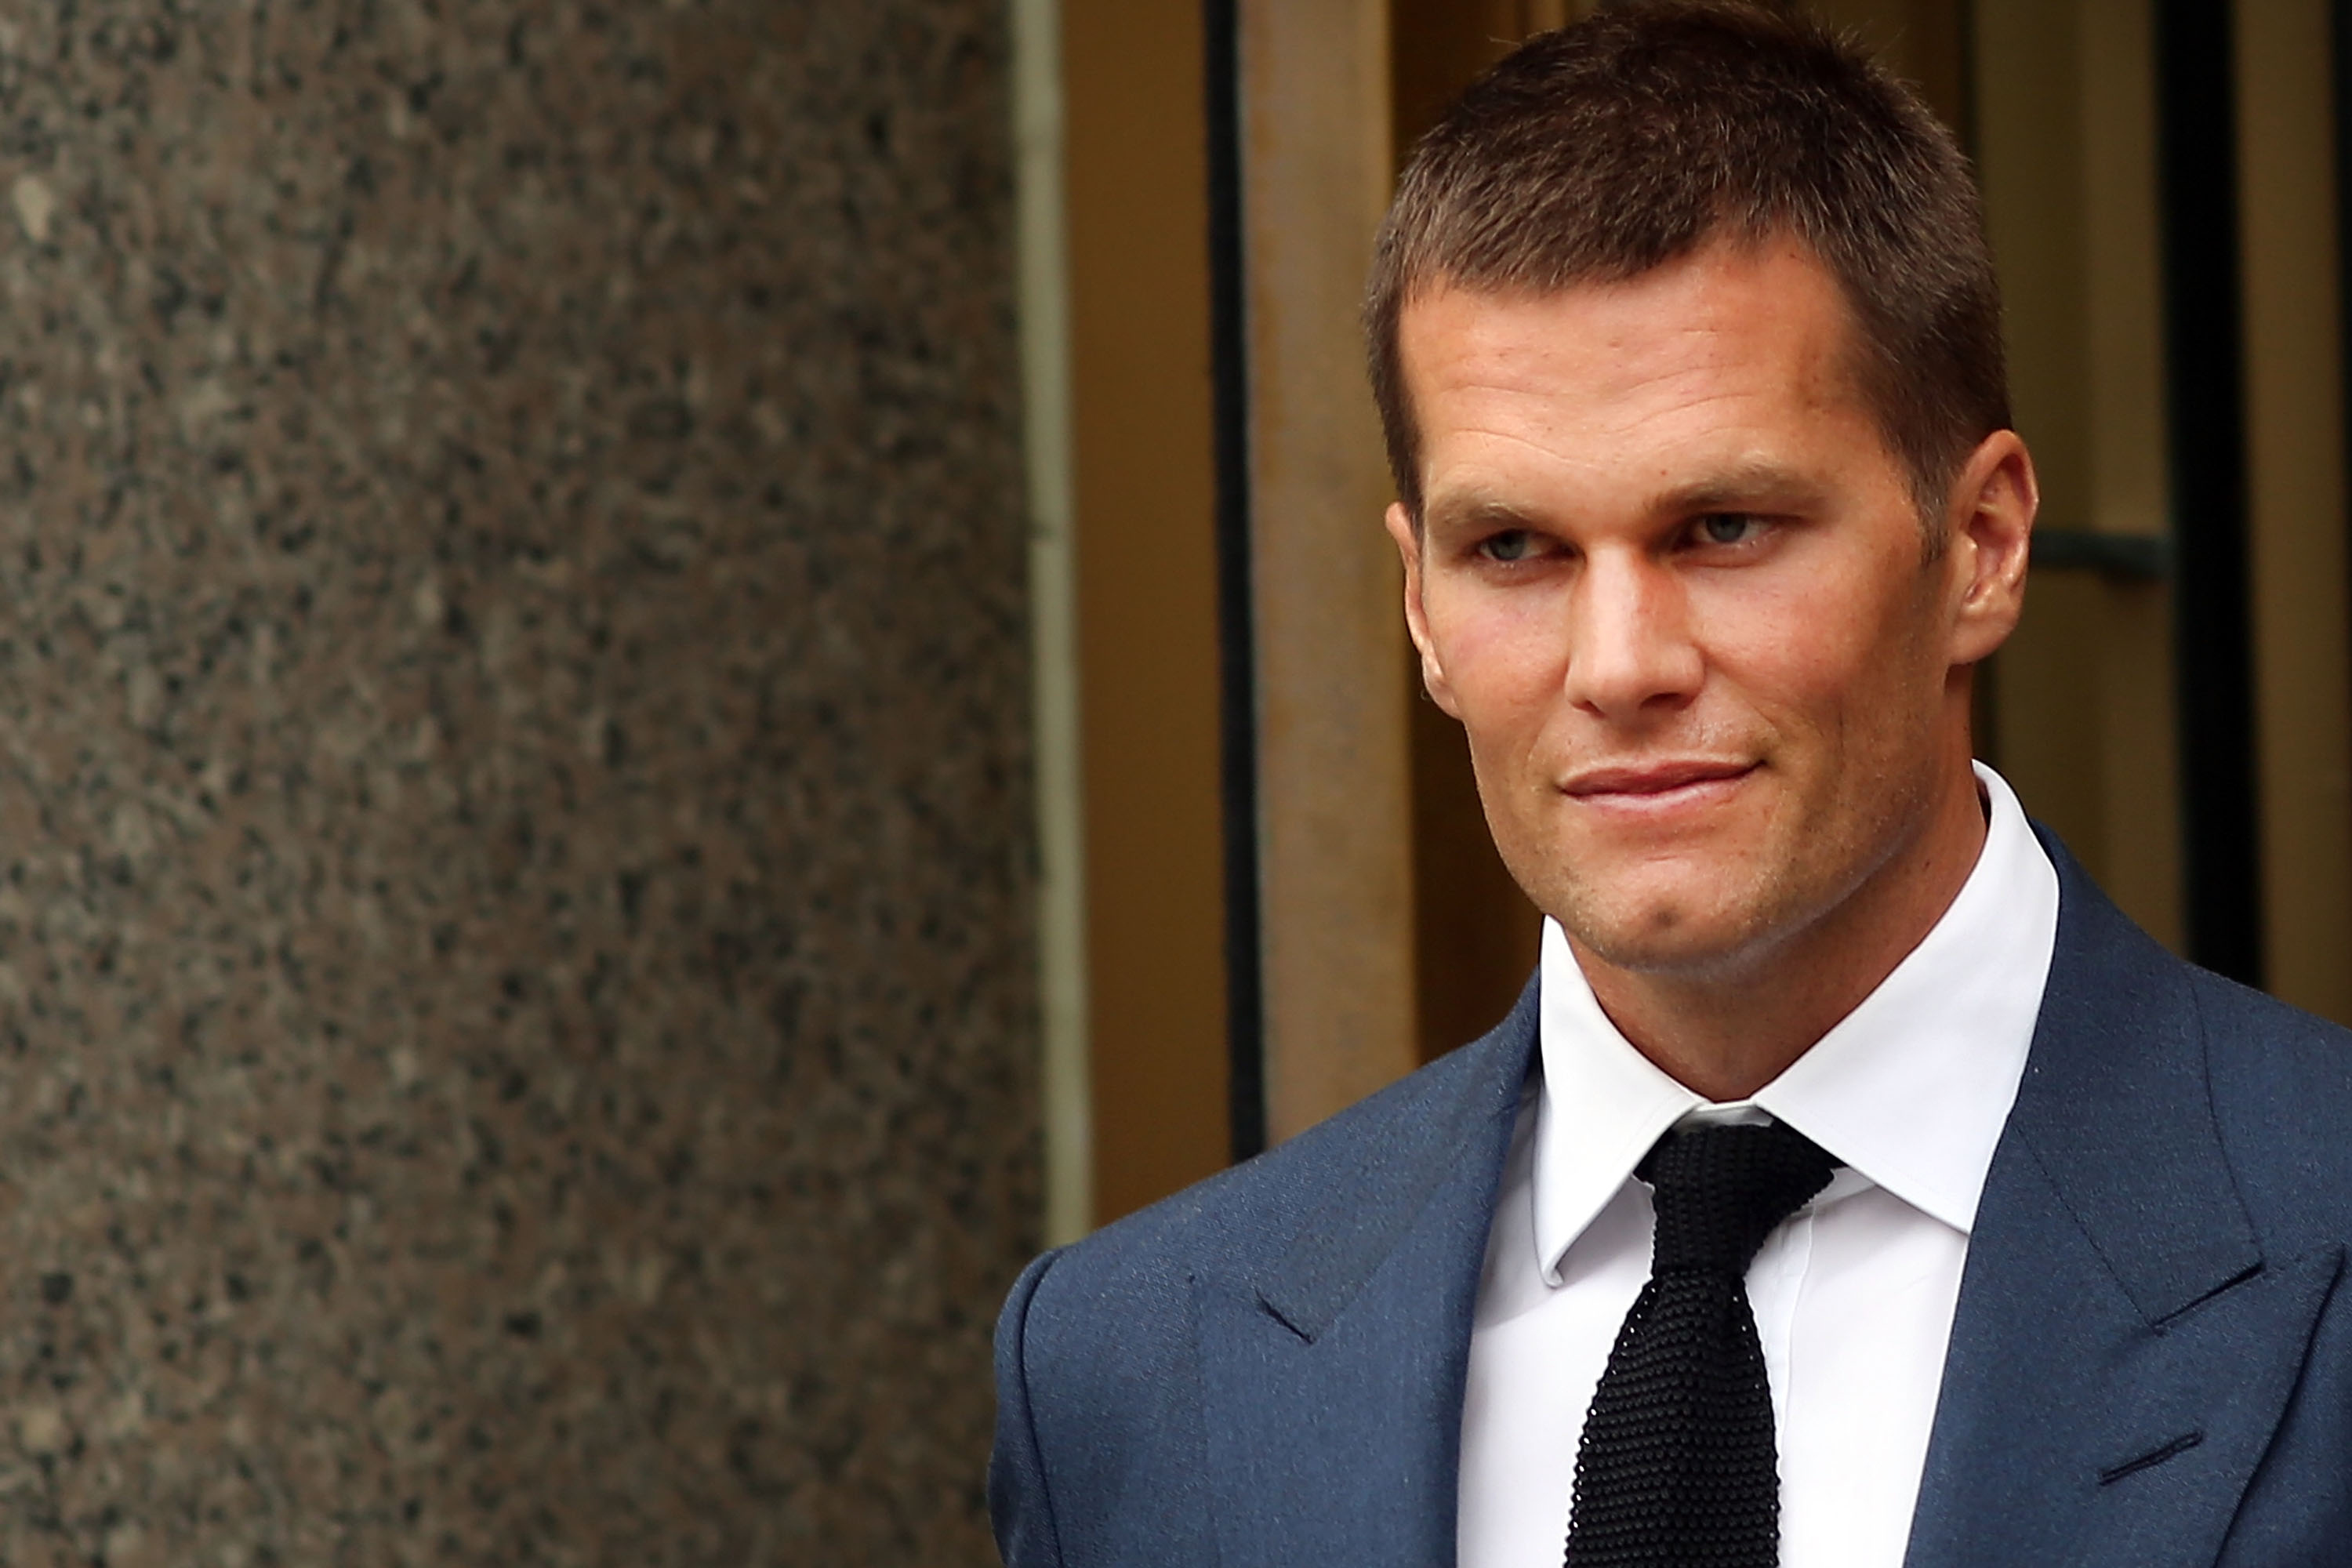 Quarterback Tom Brady of the New England Patriots leaves federal court after contesting his four game suspension with the NFL on August 31, 2015 in New York City. (Spencer Platt&mdash;Getty Images)